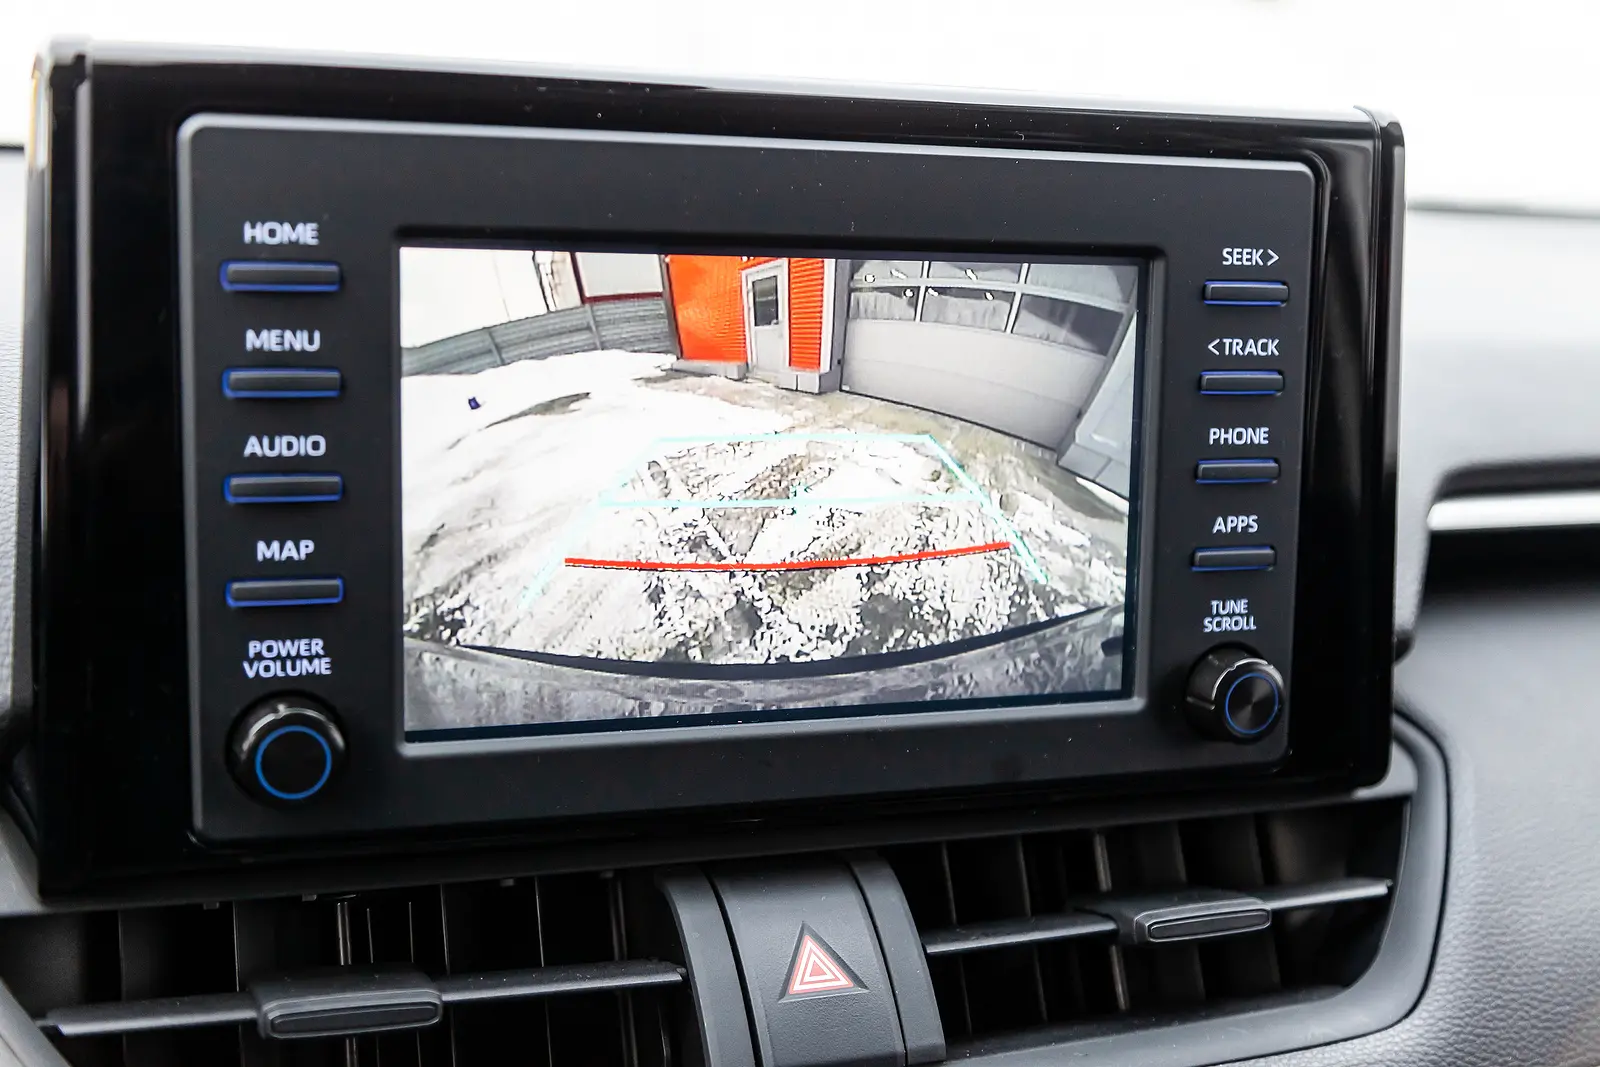 Display of the multimedia system on the car dashboard with an image from the rear view camera for safe reversing.